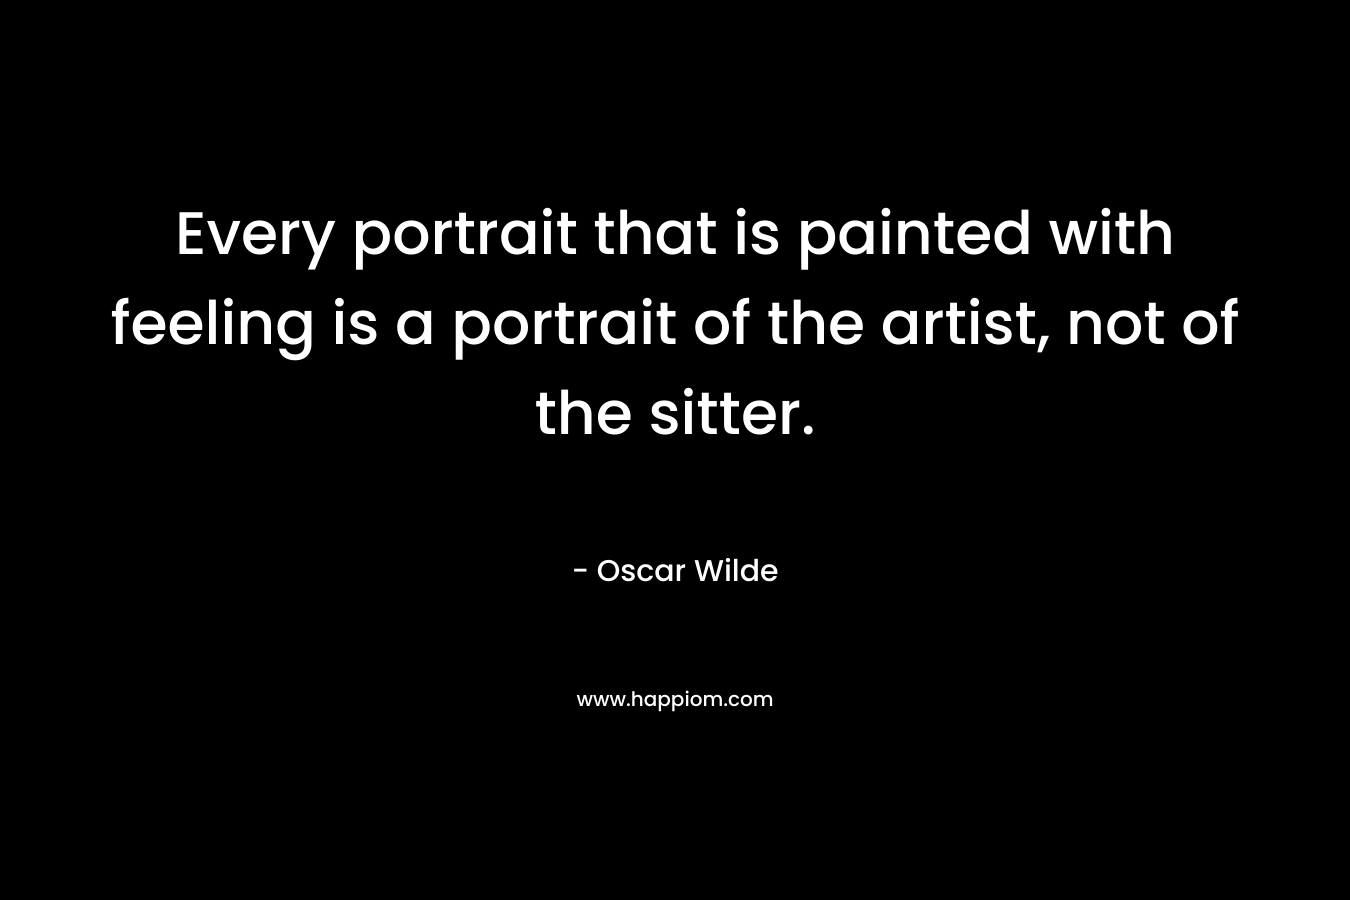 Every portrait that is painted with feeling is a portrait of the artist, not of the sitter. – Oscar Wilde